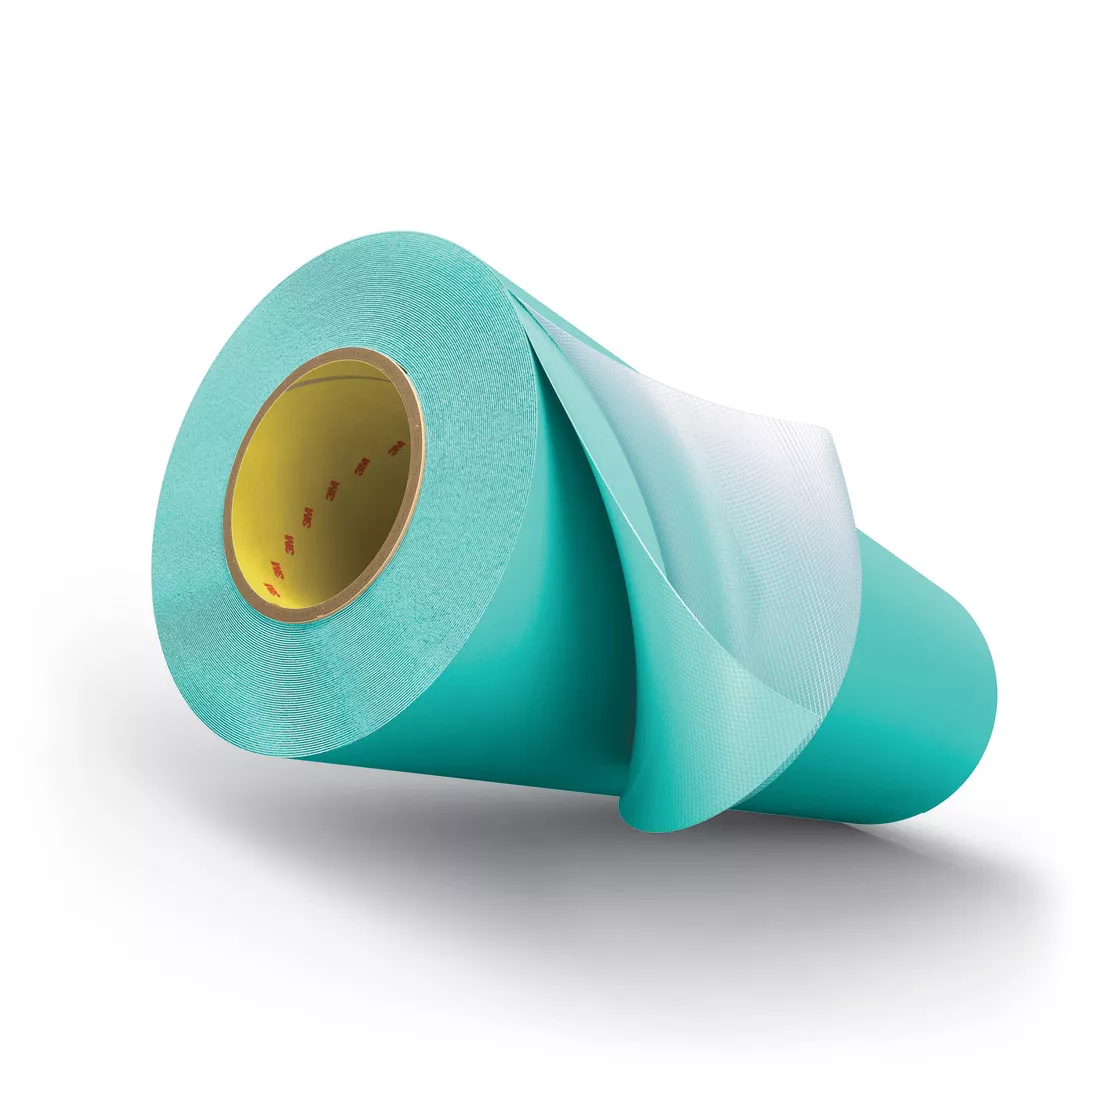 3M™ Cushion-Mount™ Plus Plate Mounting Tape E1720H, Teal, 18 in x 5 yd,
20 mil, 1 roll per case, Sample